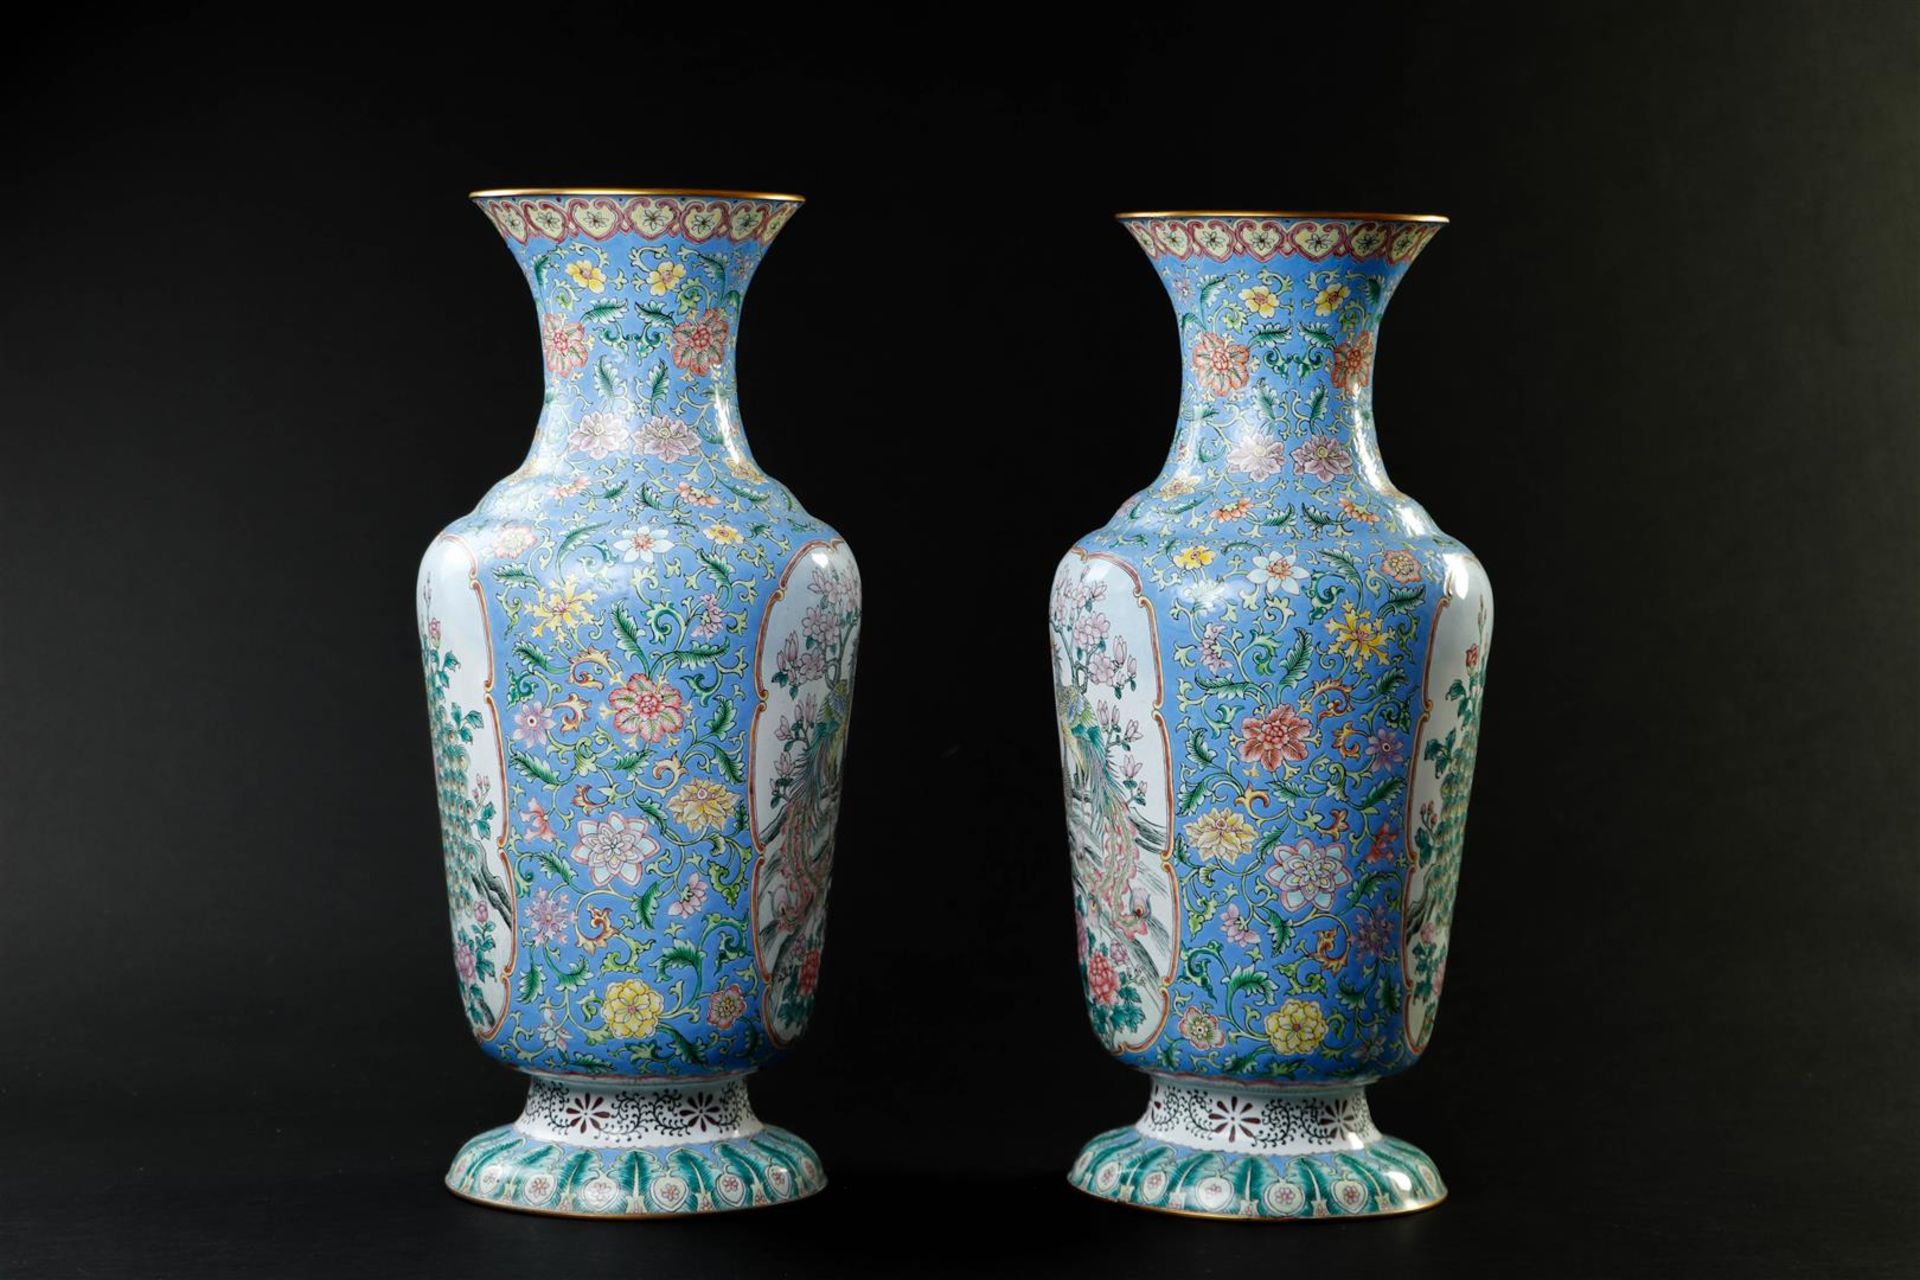 A pair of enamel famille rose vases depicting peacocks. China, 20th century.
H. 44 cm. - Image 2 of 6